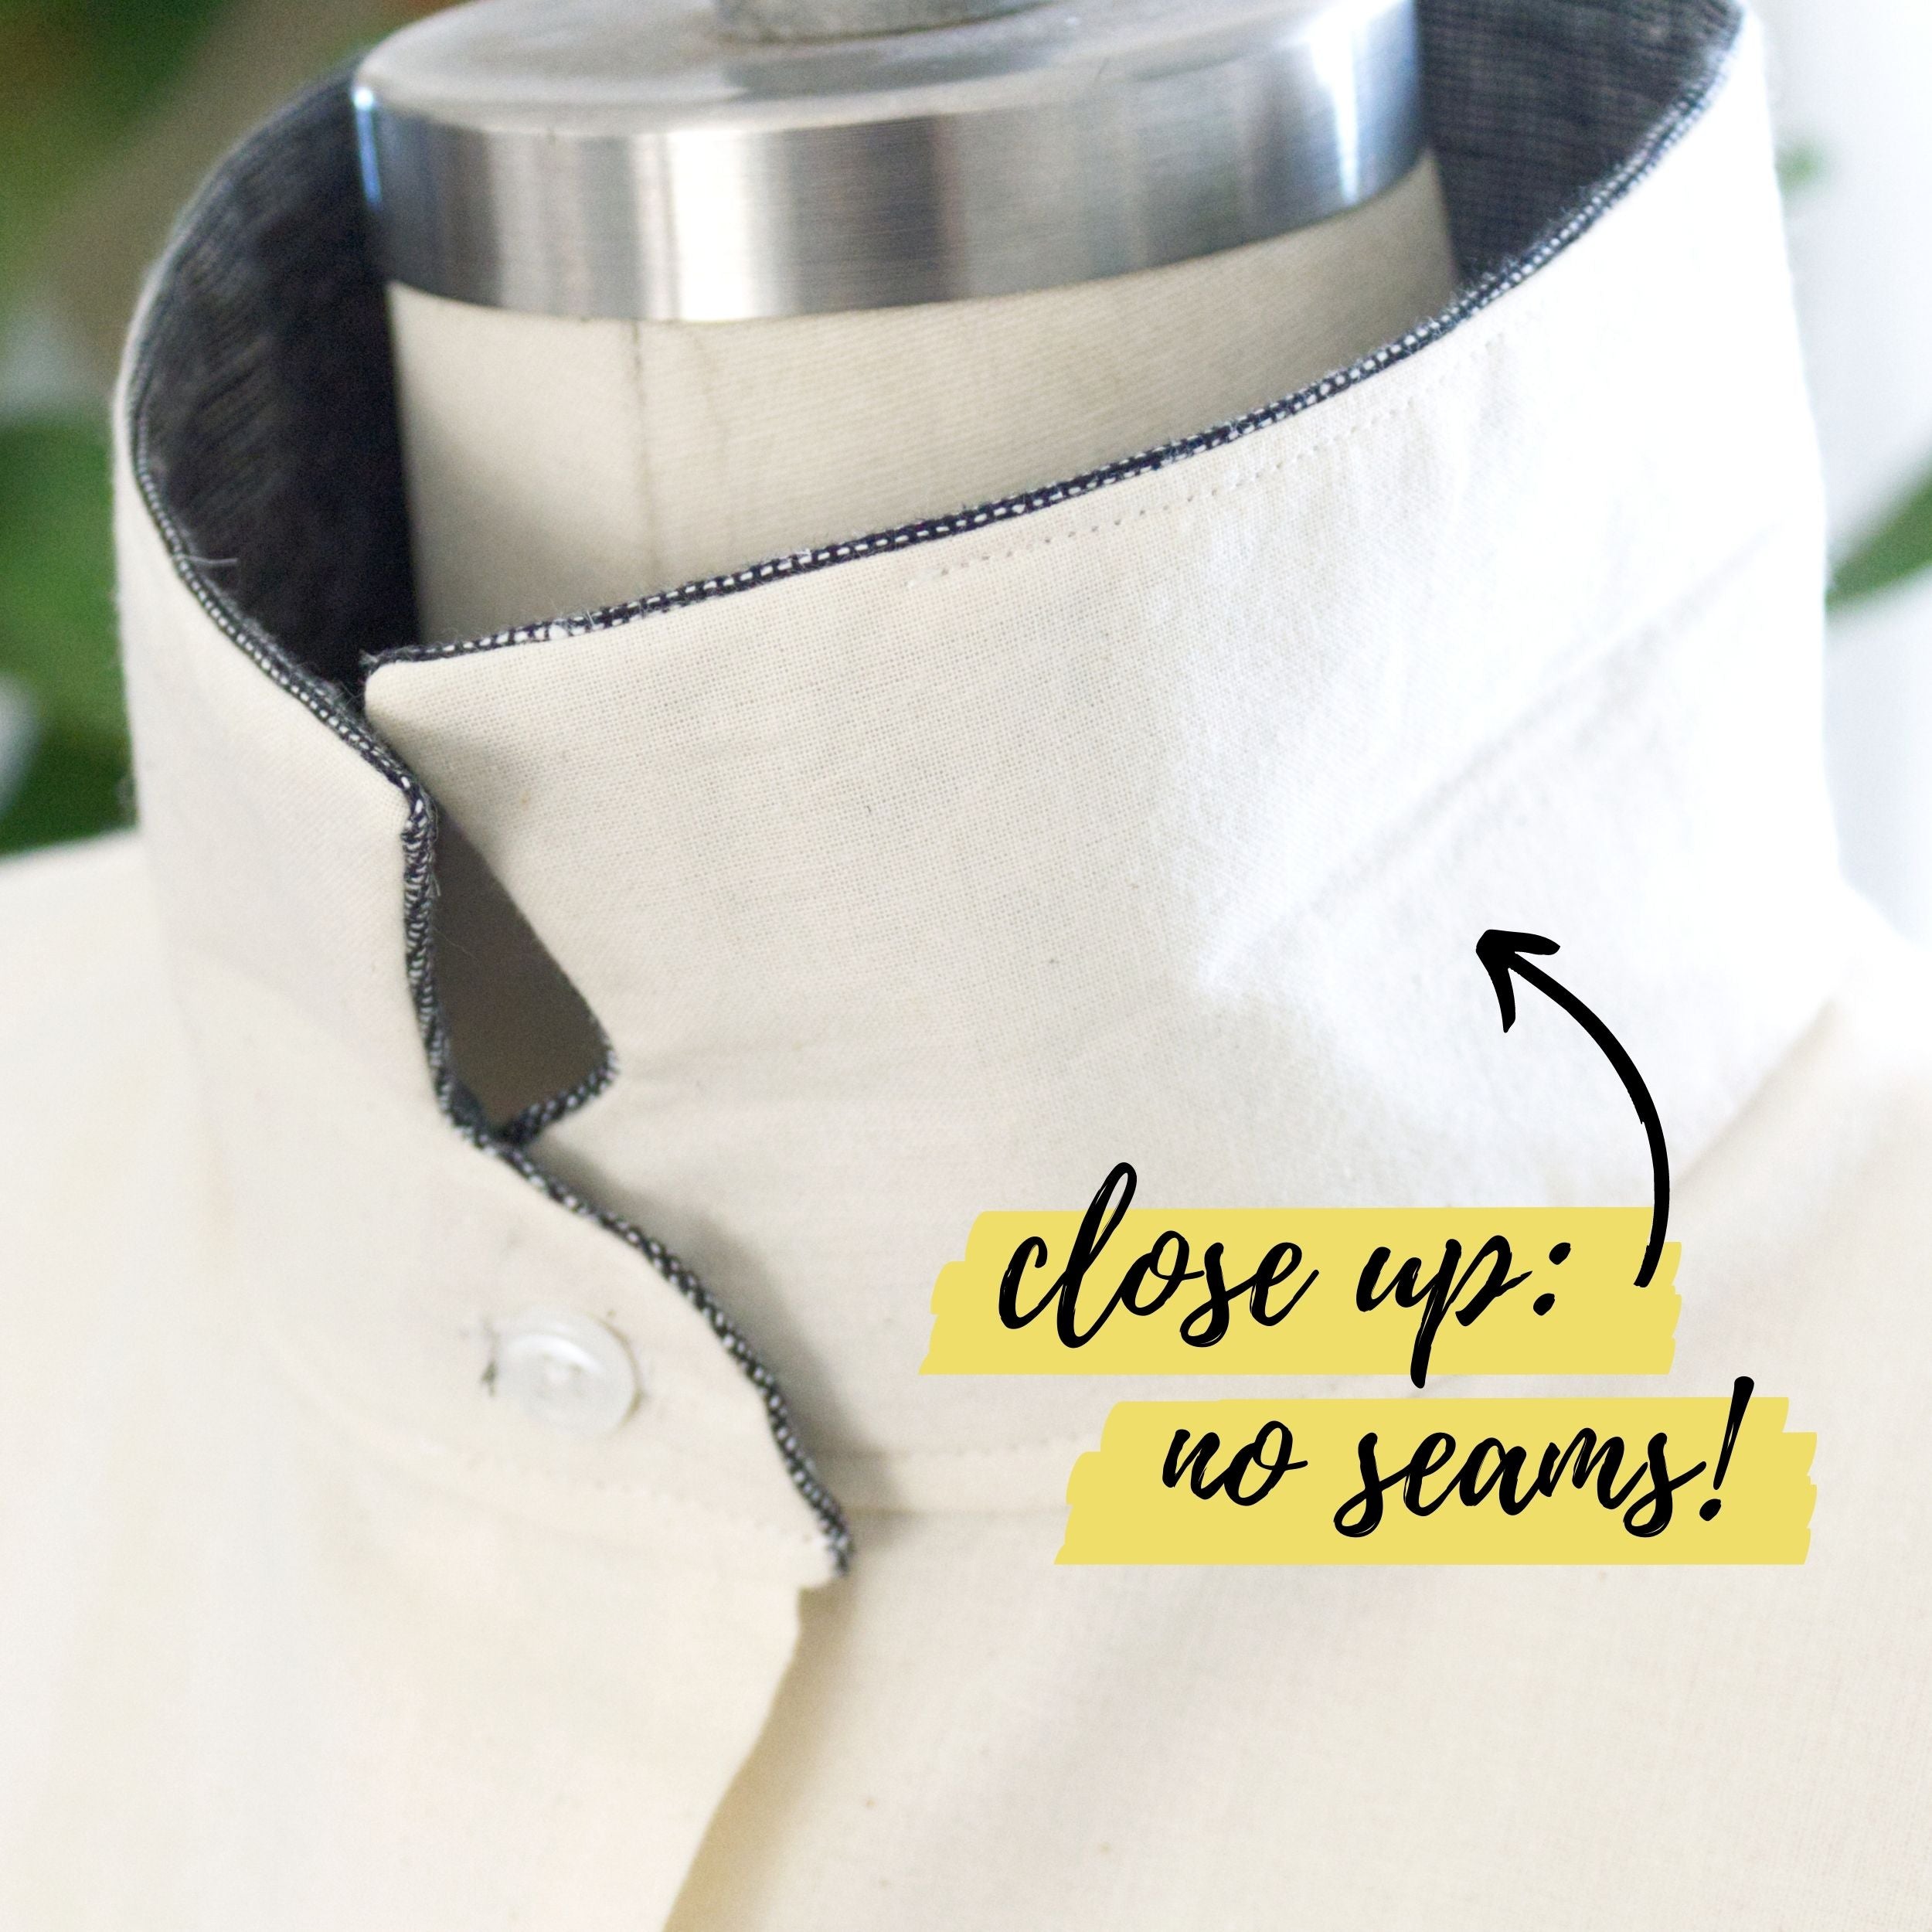 Construction detail: The all-in-one collar close up